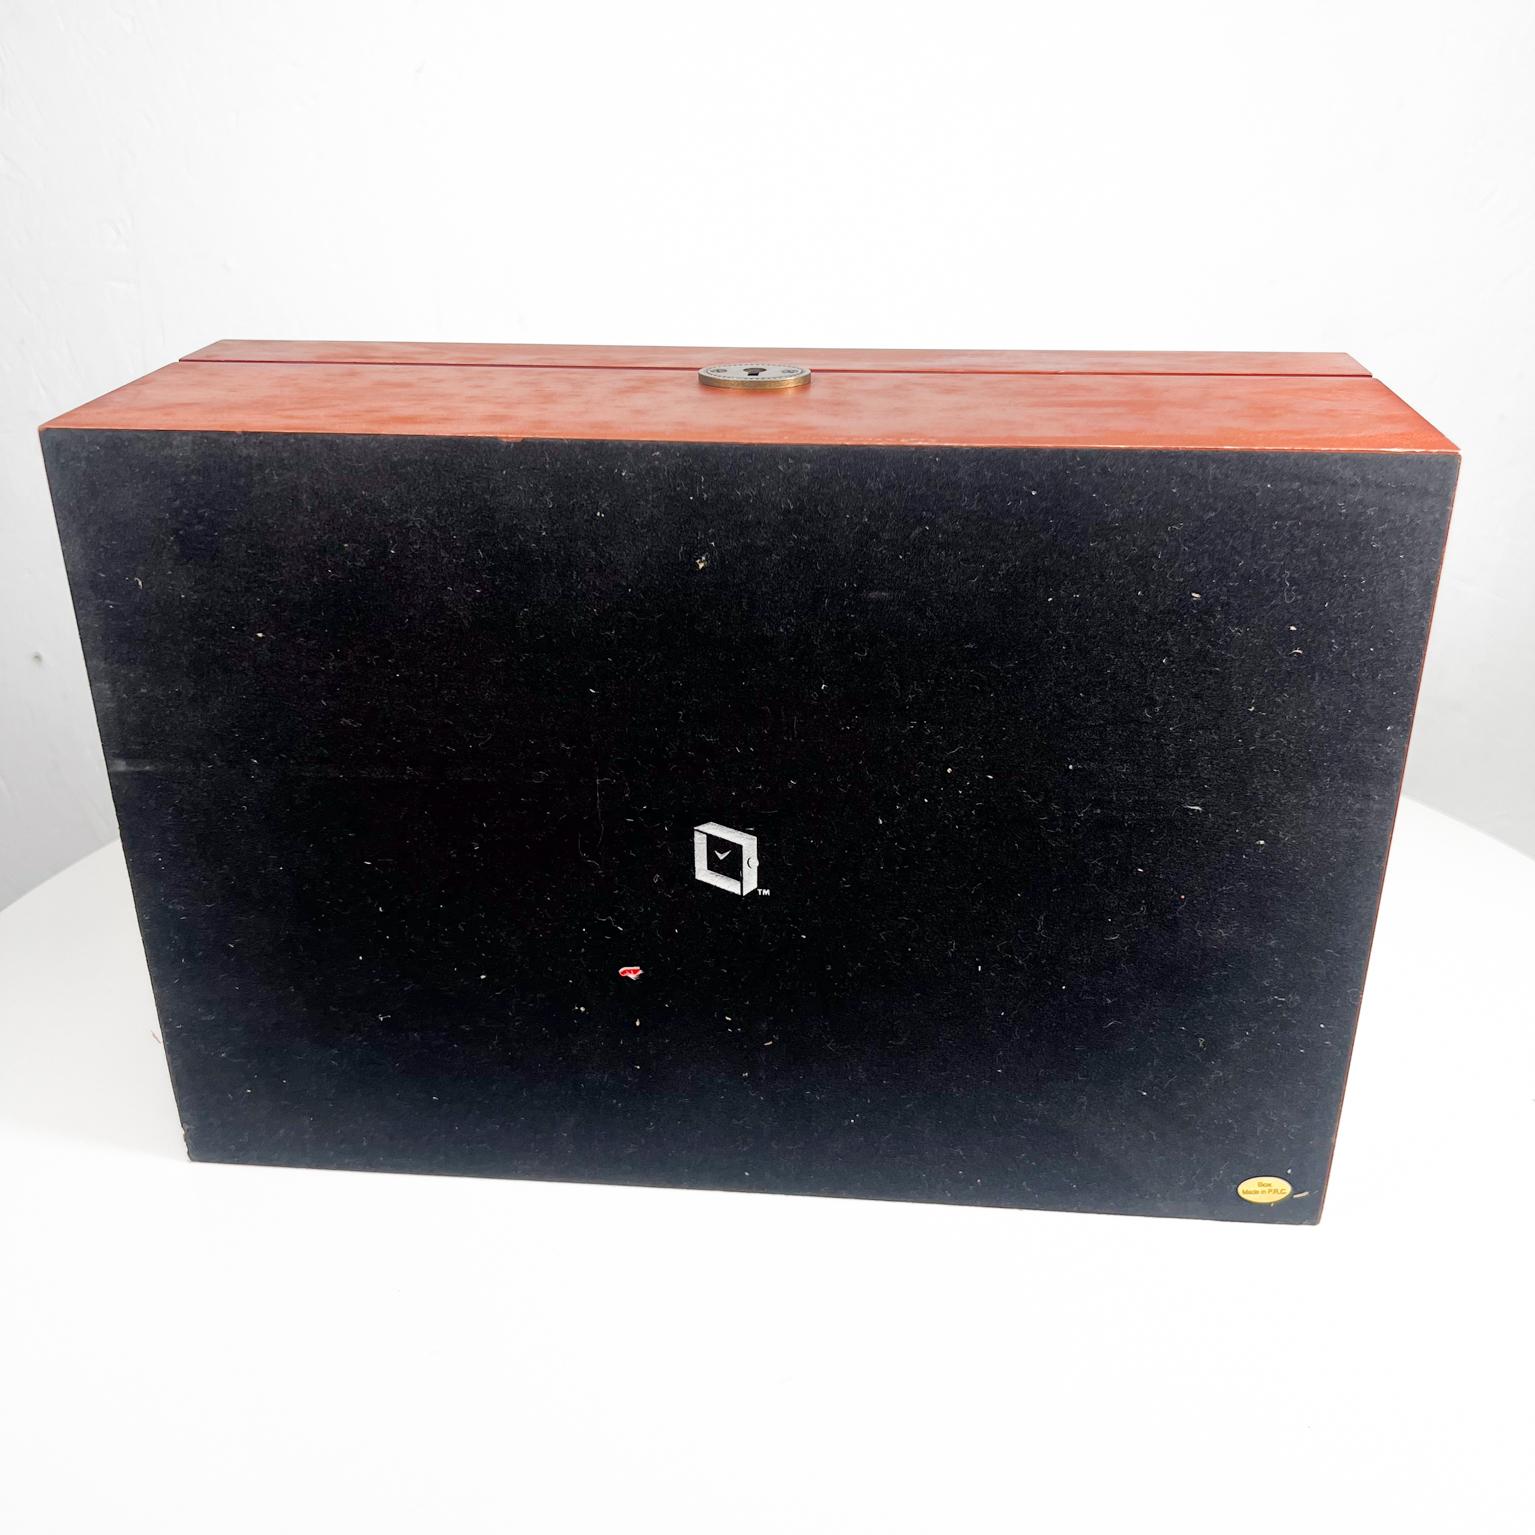 1950s Modern Wood Jewelry Box Felt Sectioned Interior Compartments 9